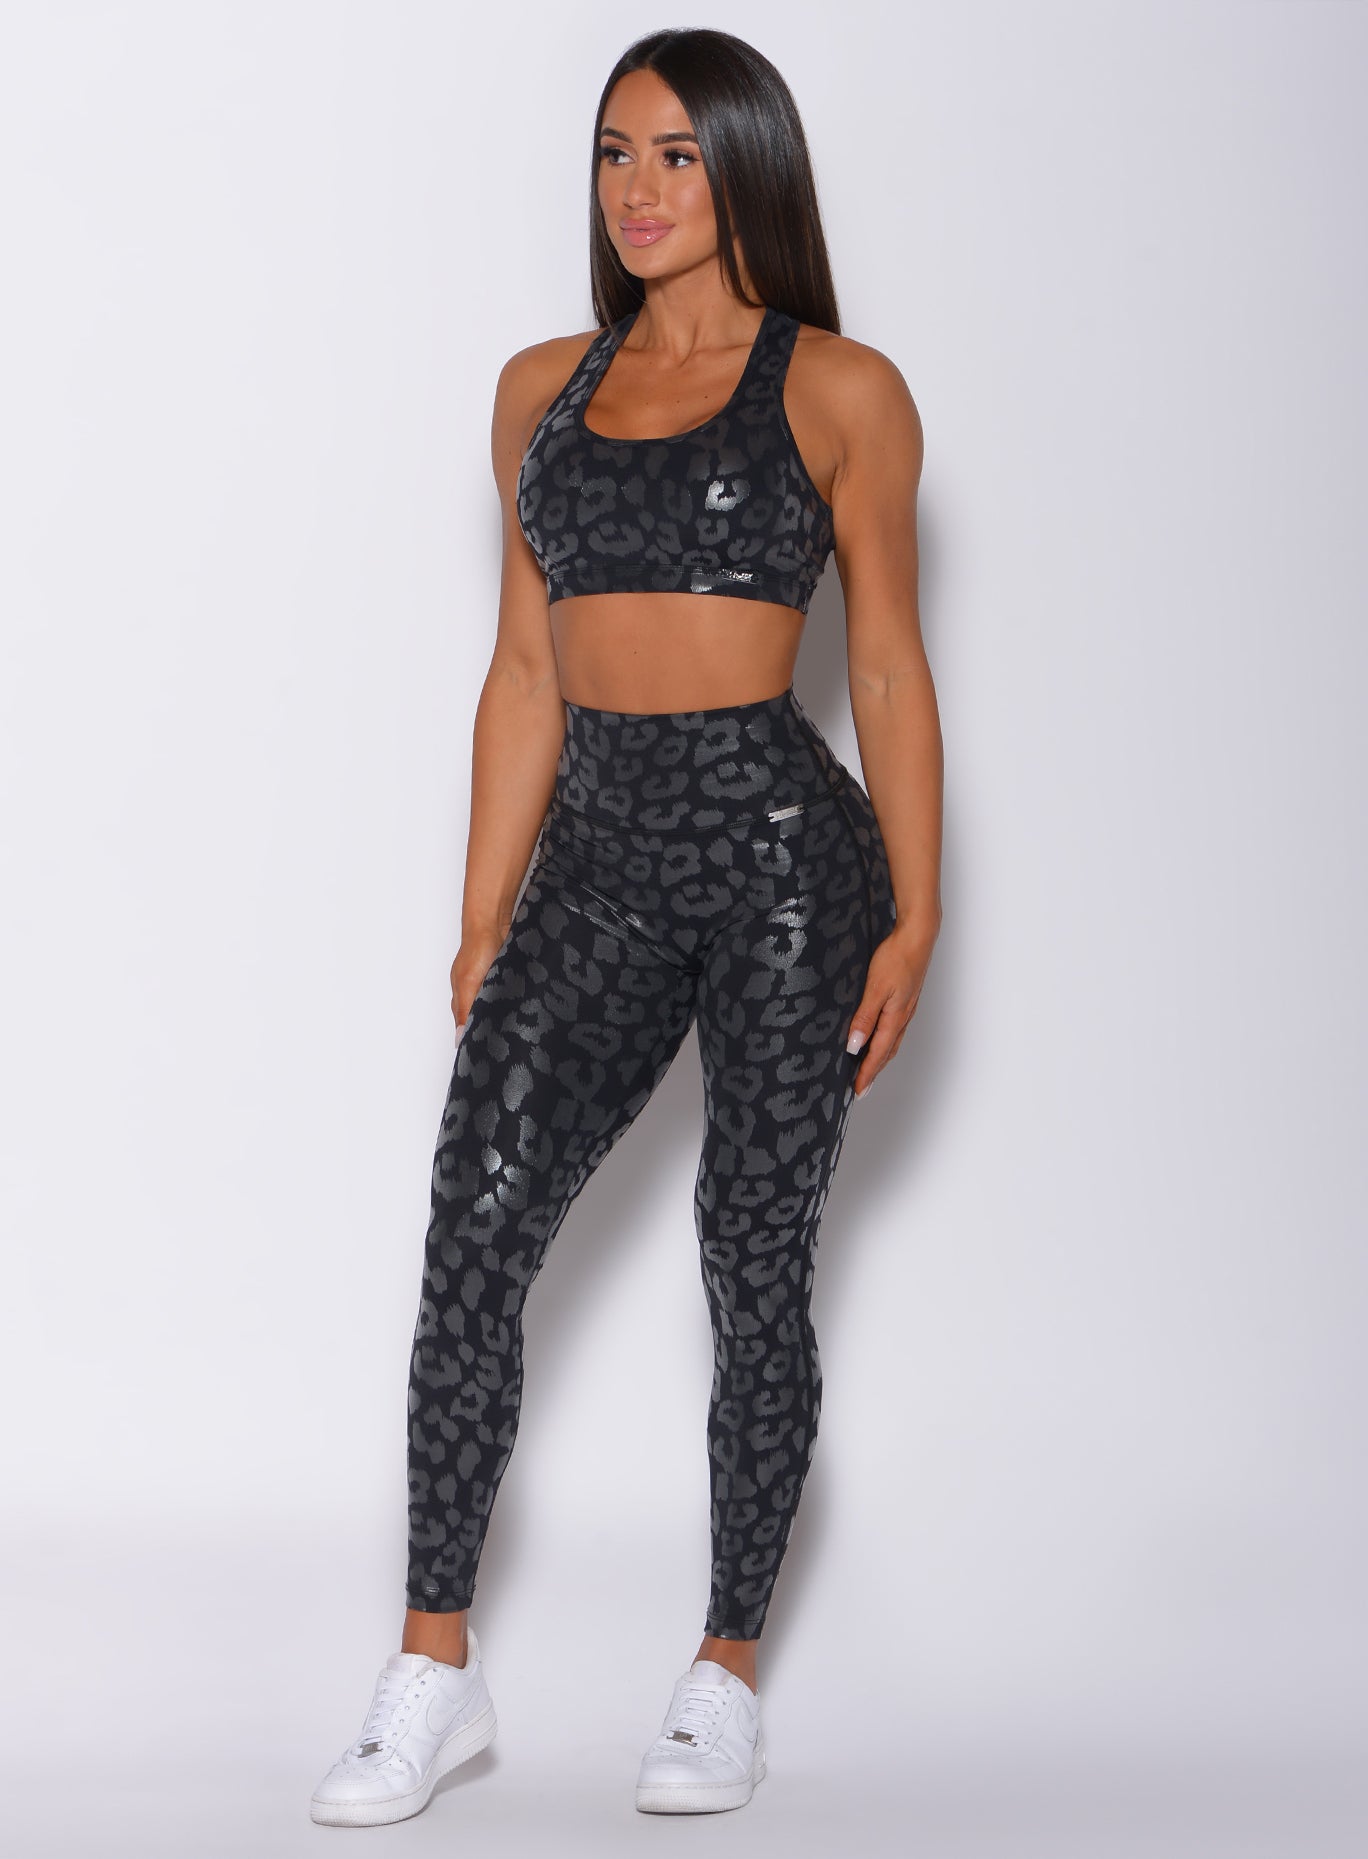 Front profile view of a model wearing our shine leopard leggings in Black Leopard color along with the matching sports bra 